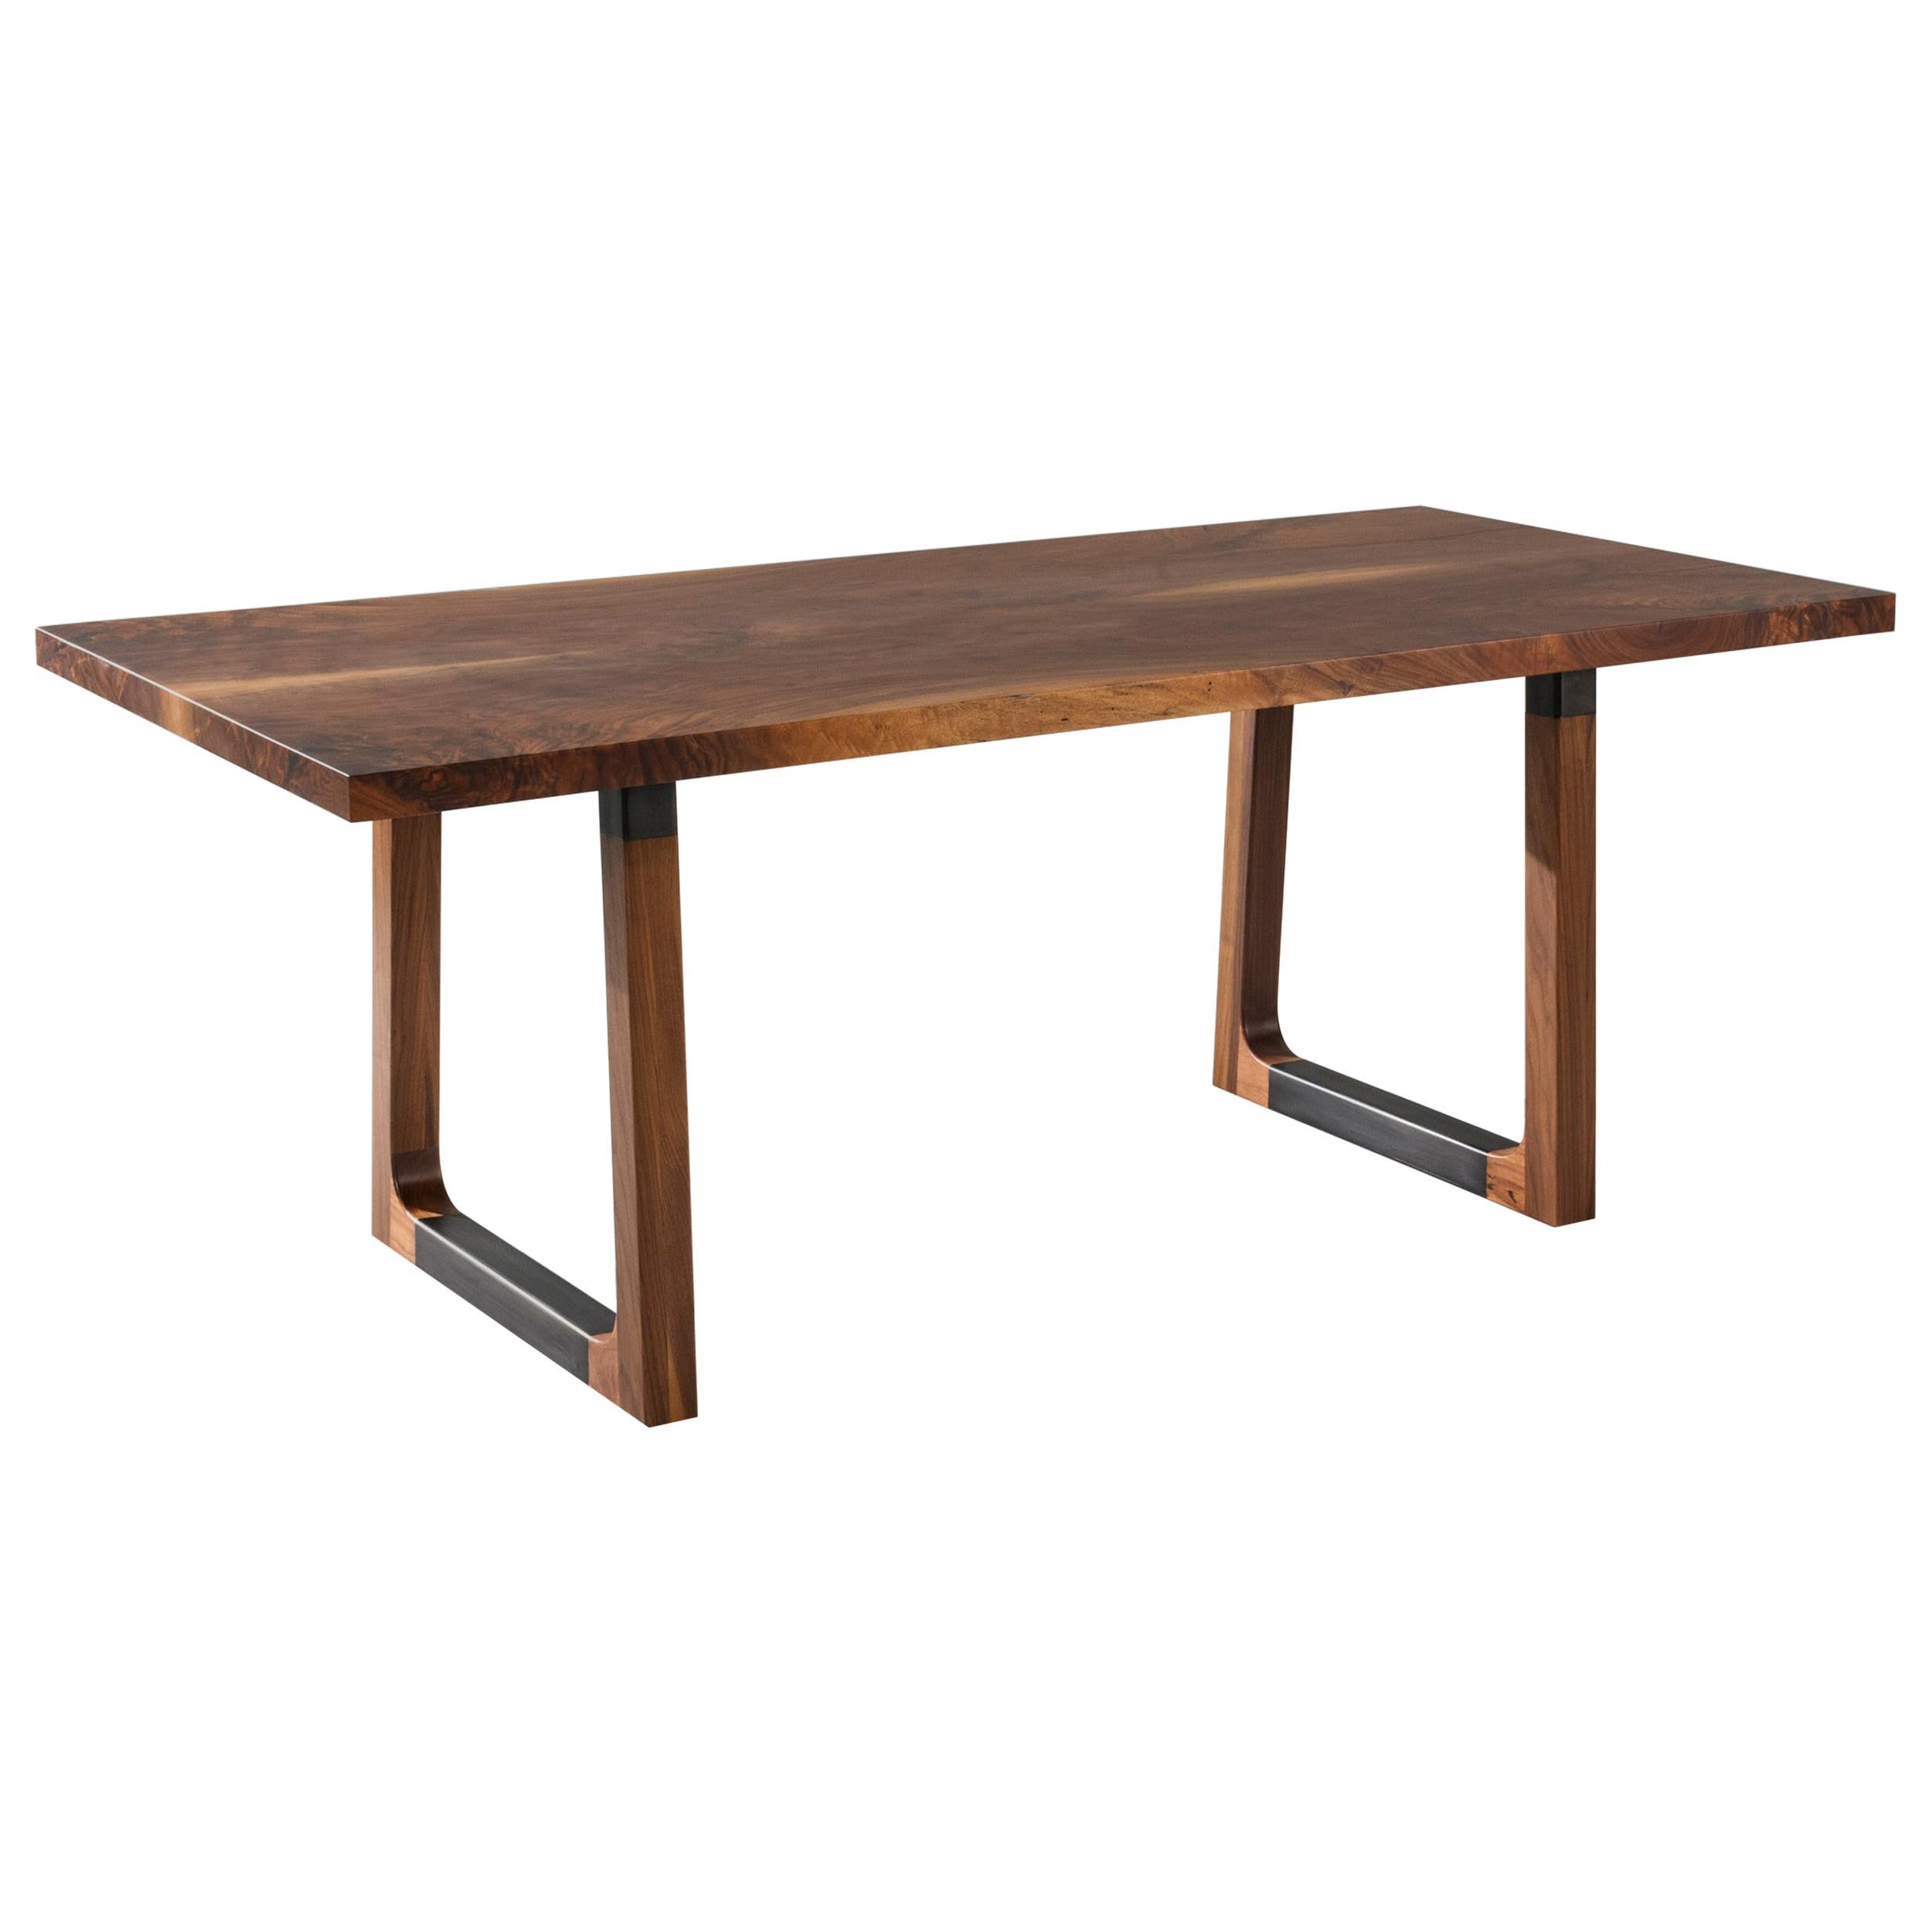 Solid Walnut Dining Table with Walnut and Black Steel Legs "Campau Dining Table"